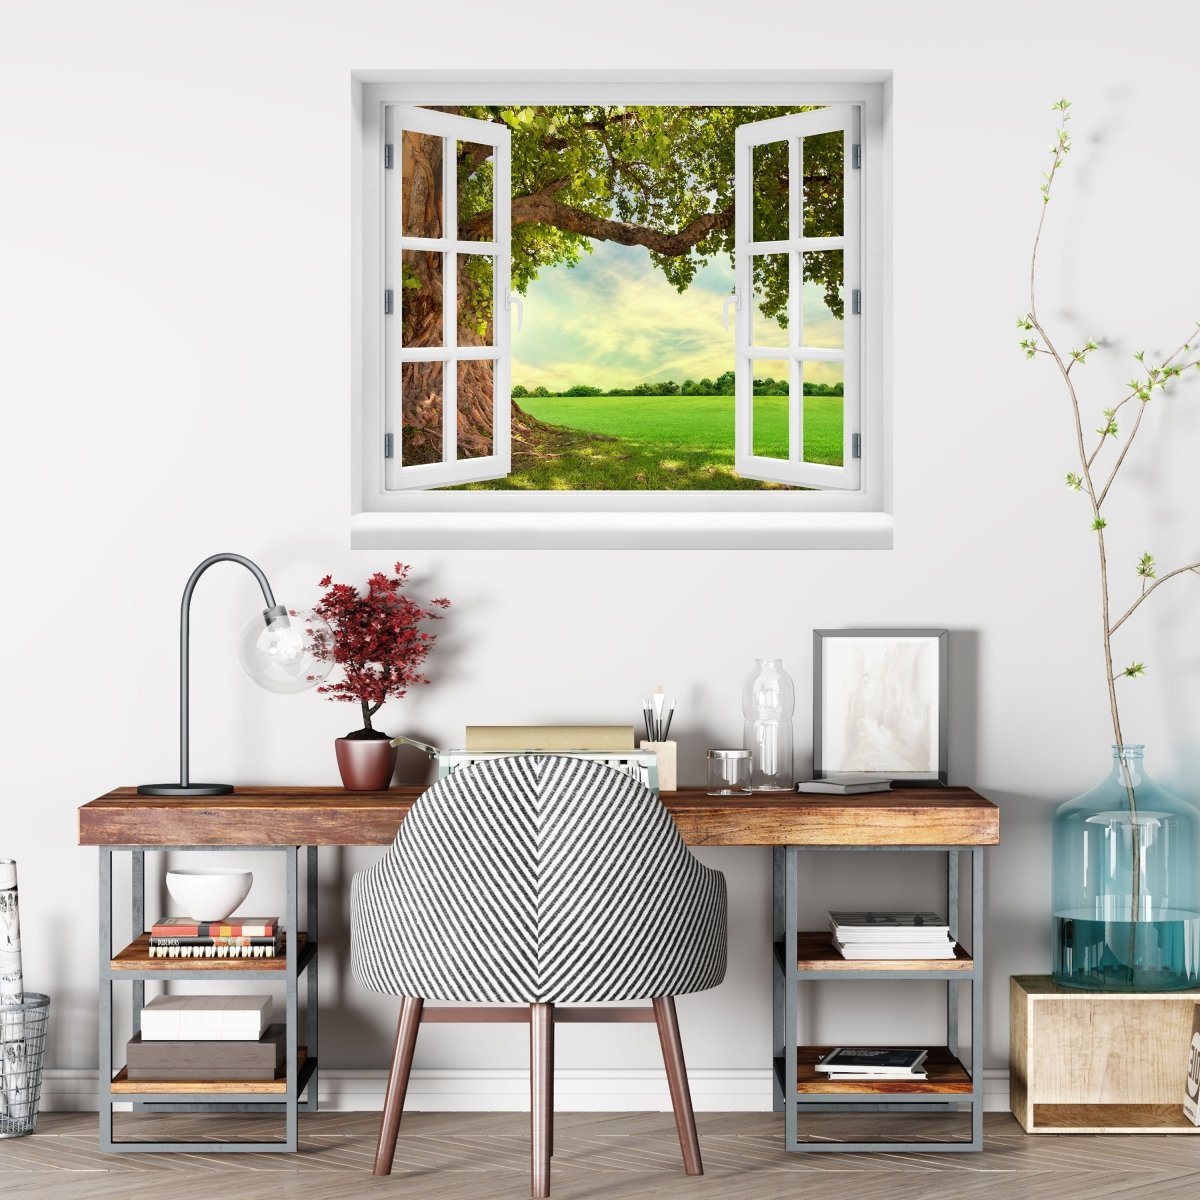 3D wall sticker Spring Meadow - Wall Decal M0715